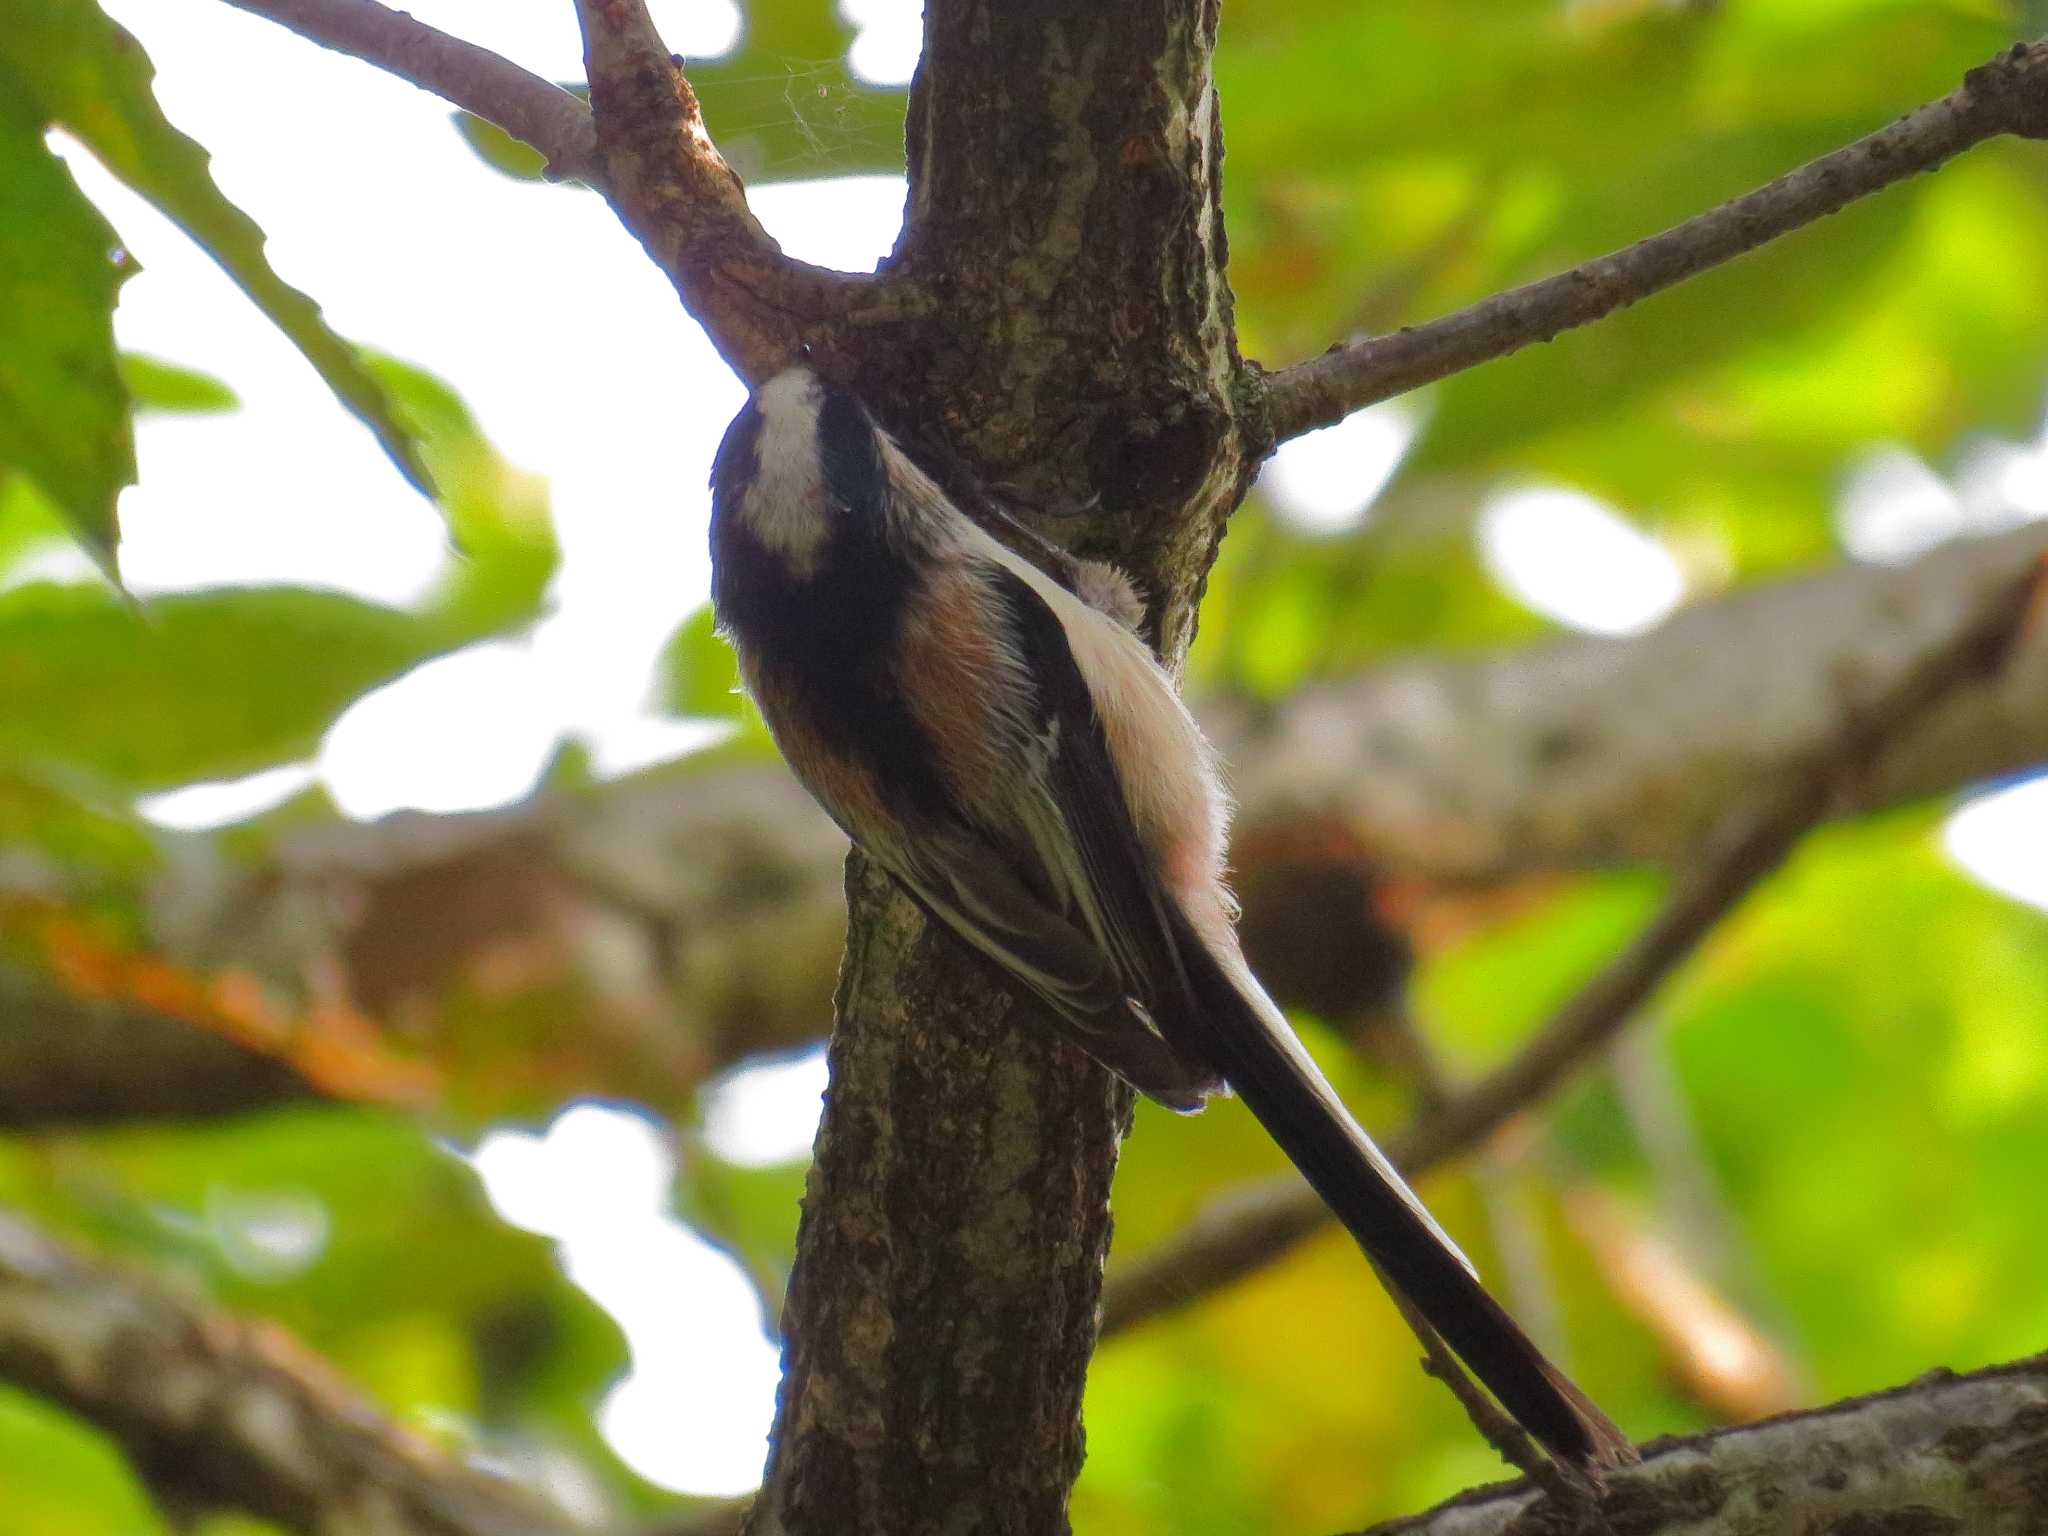 Photo of Long-tailed Tit at 錦織公園 by 小野友弘